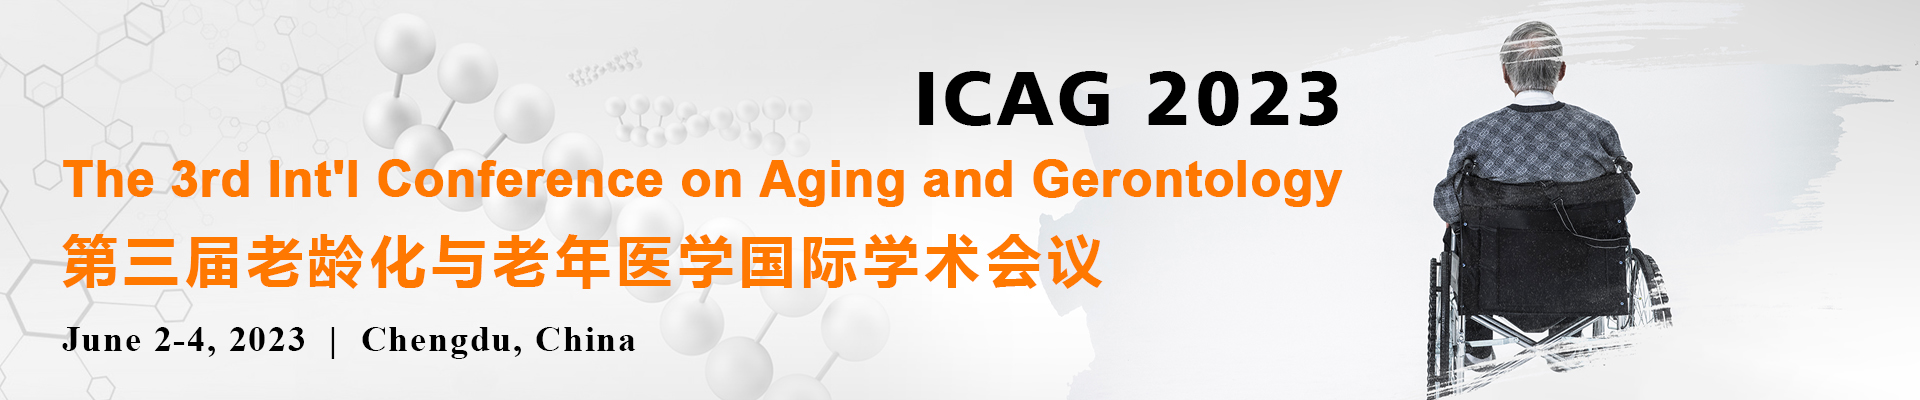 The 3rd Int'l Conference on Aging and Gerontology (ICAG 2023)